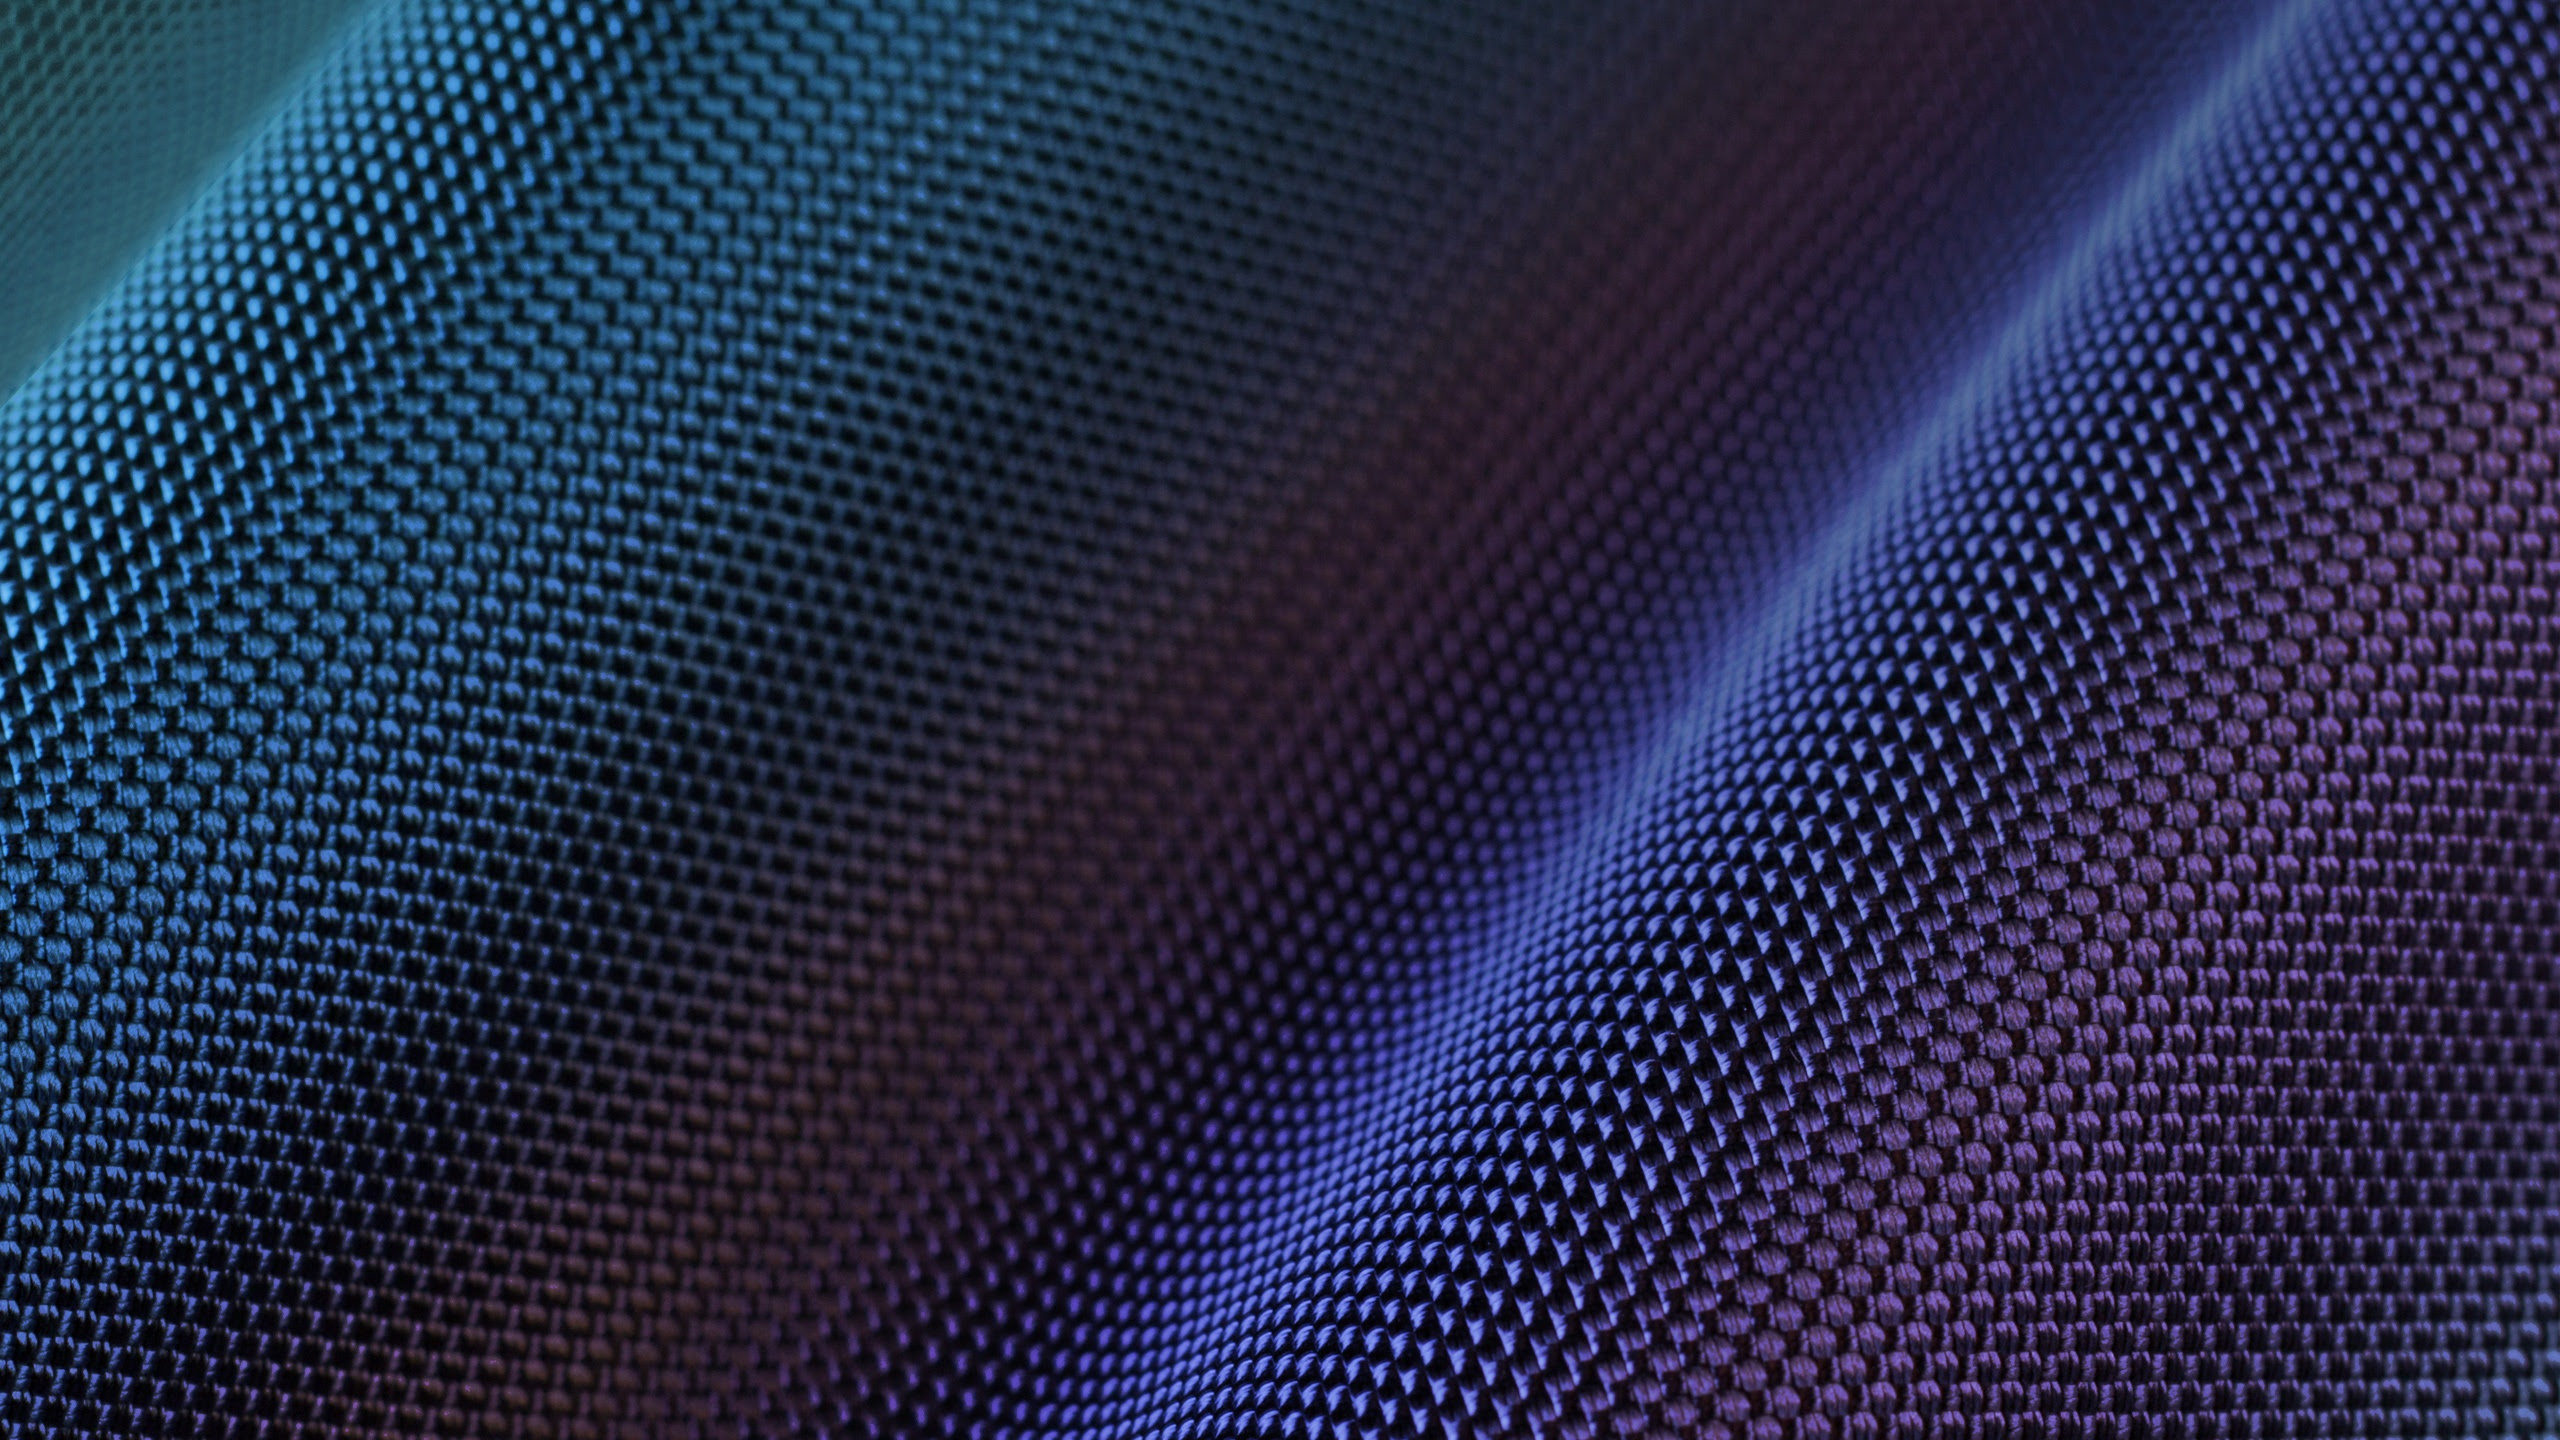 Carbon Fiber Wallpapers in jpg format for free download